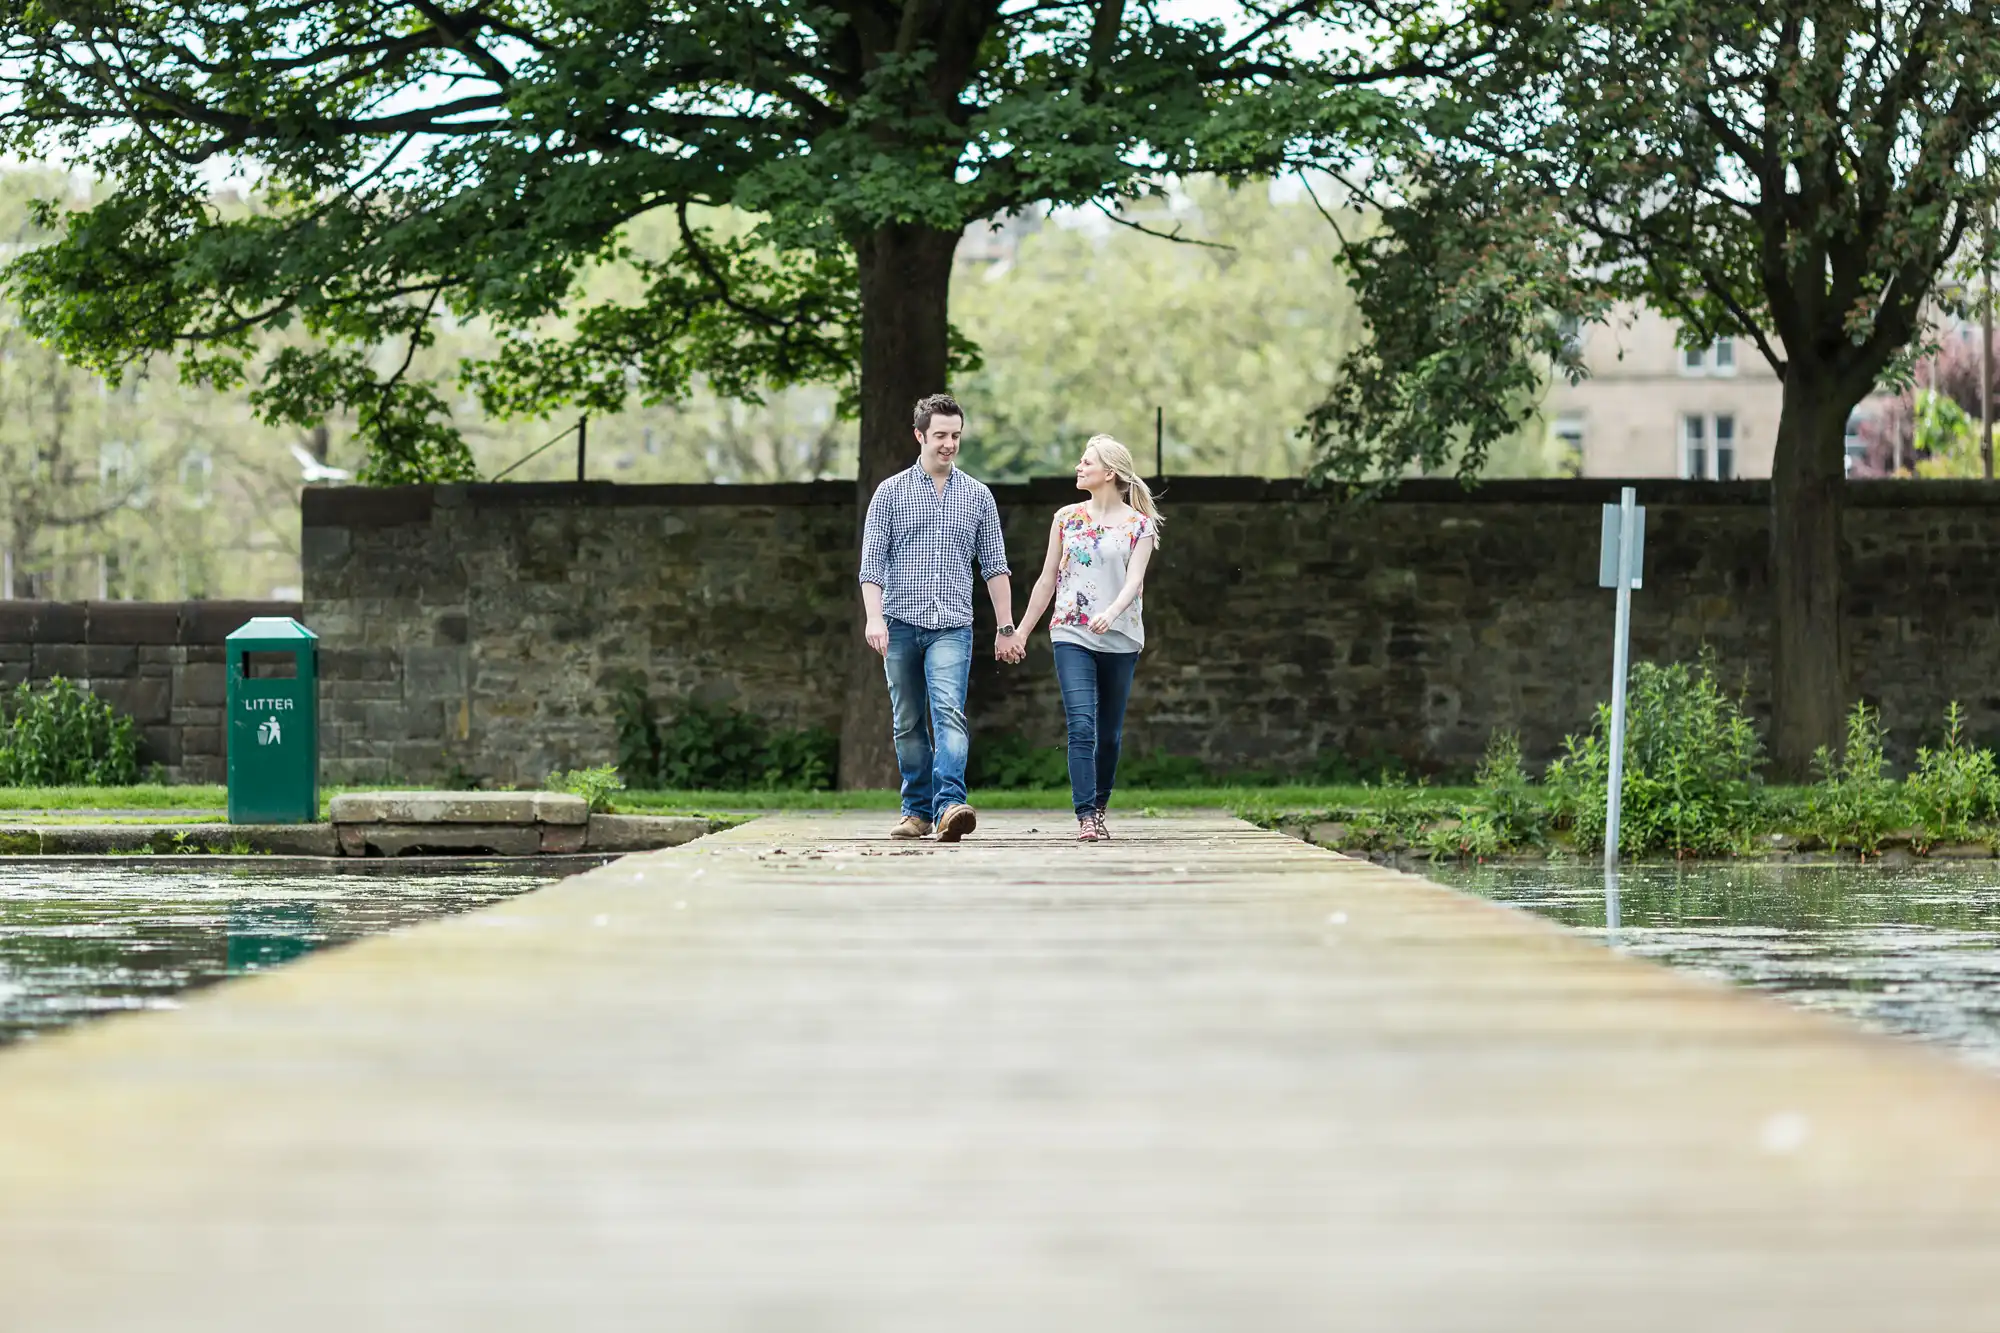 A couple walks hand in hand along a narrow wooden pier in a park, surrounded by trees and a stone wall in the background.